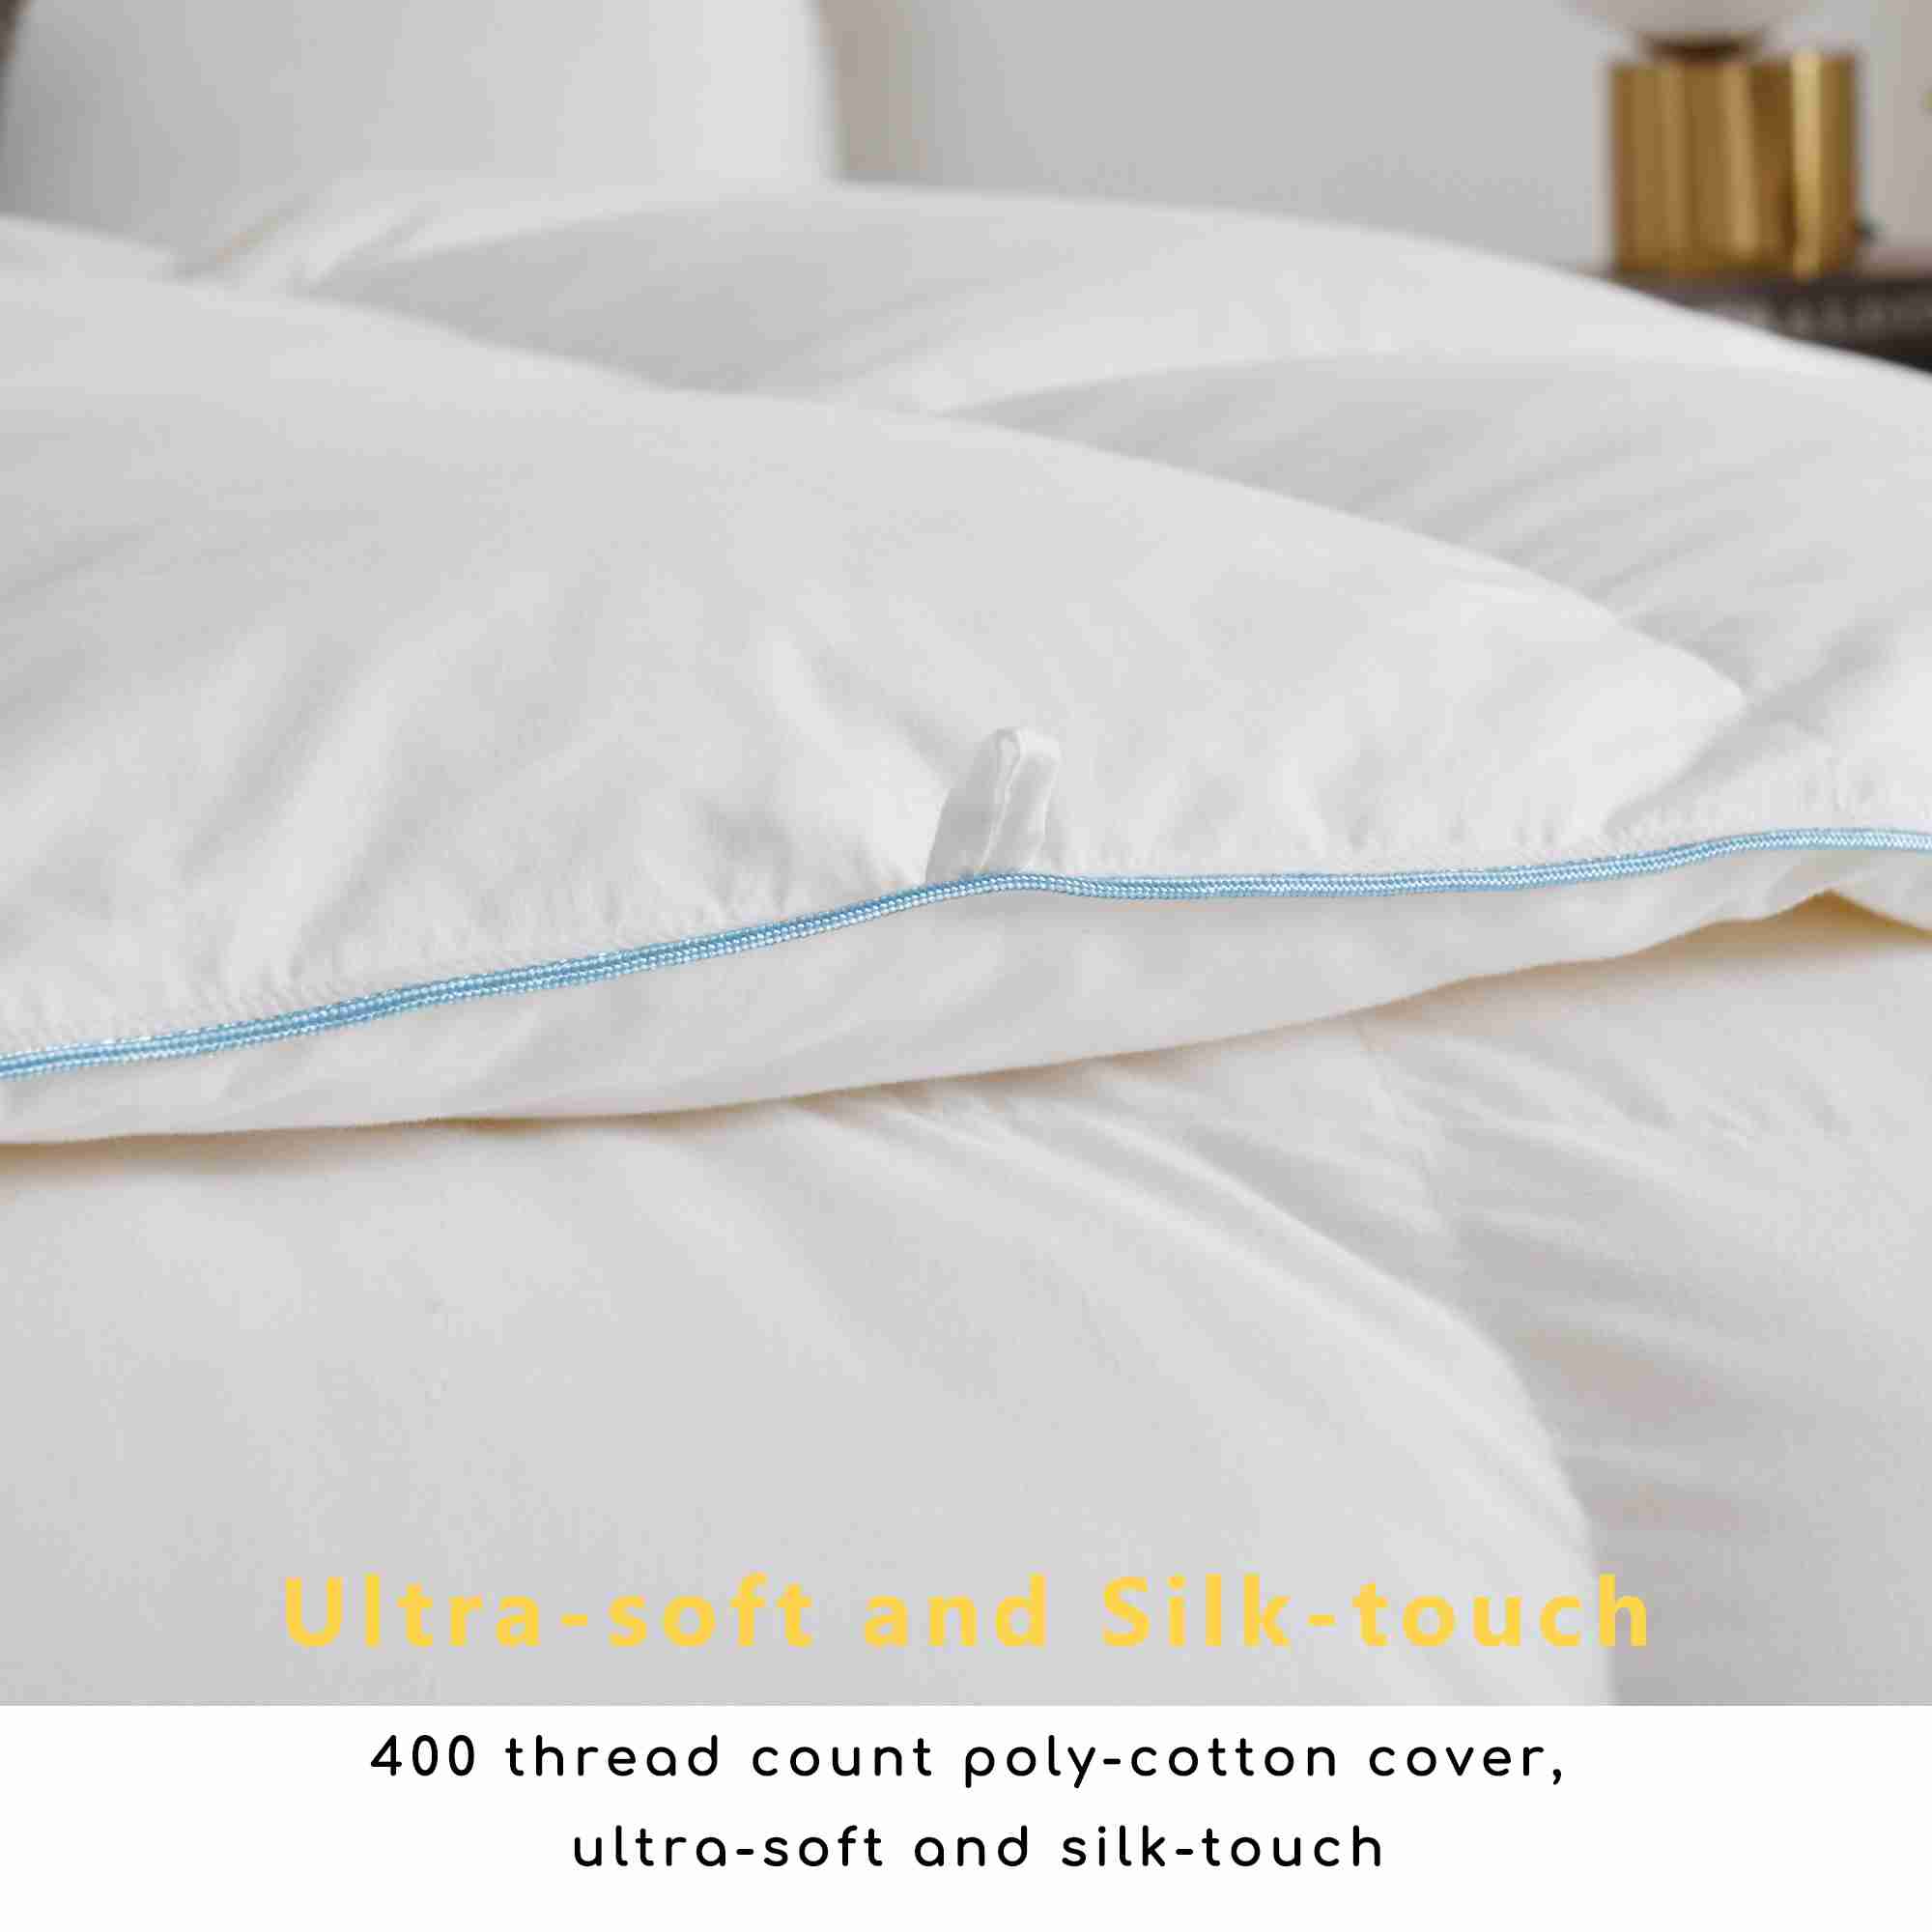 goose-down-comforter-twin-size-hotel-collection with discount code